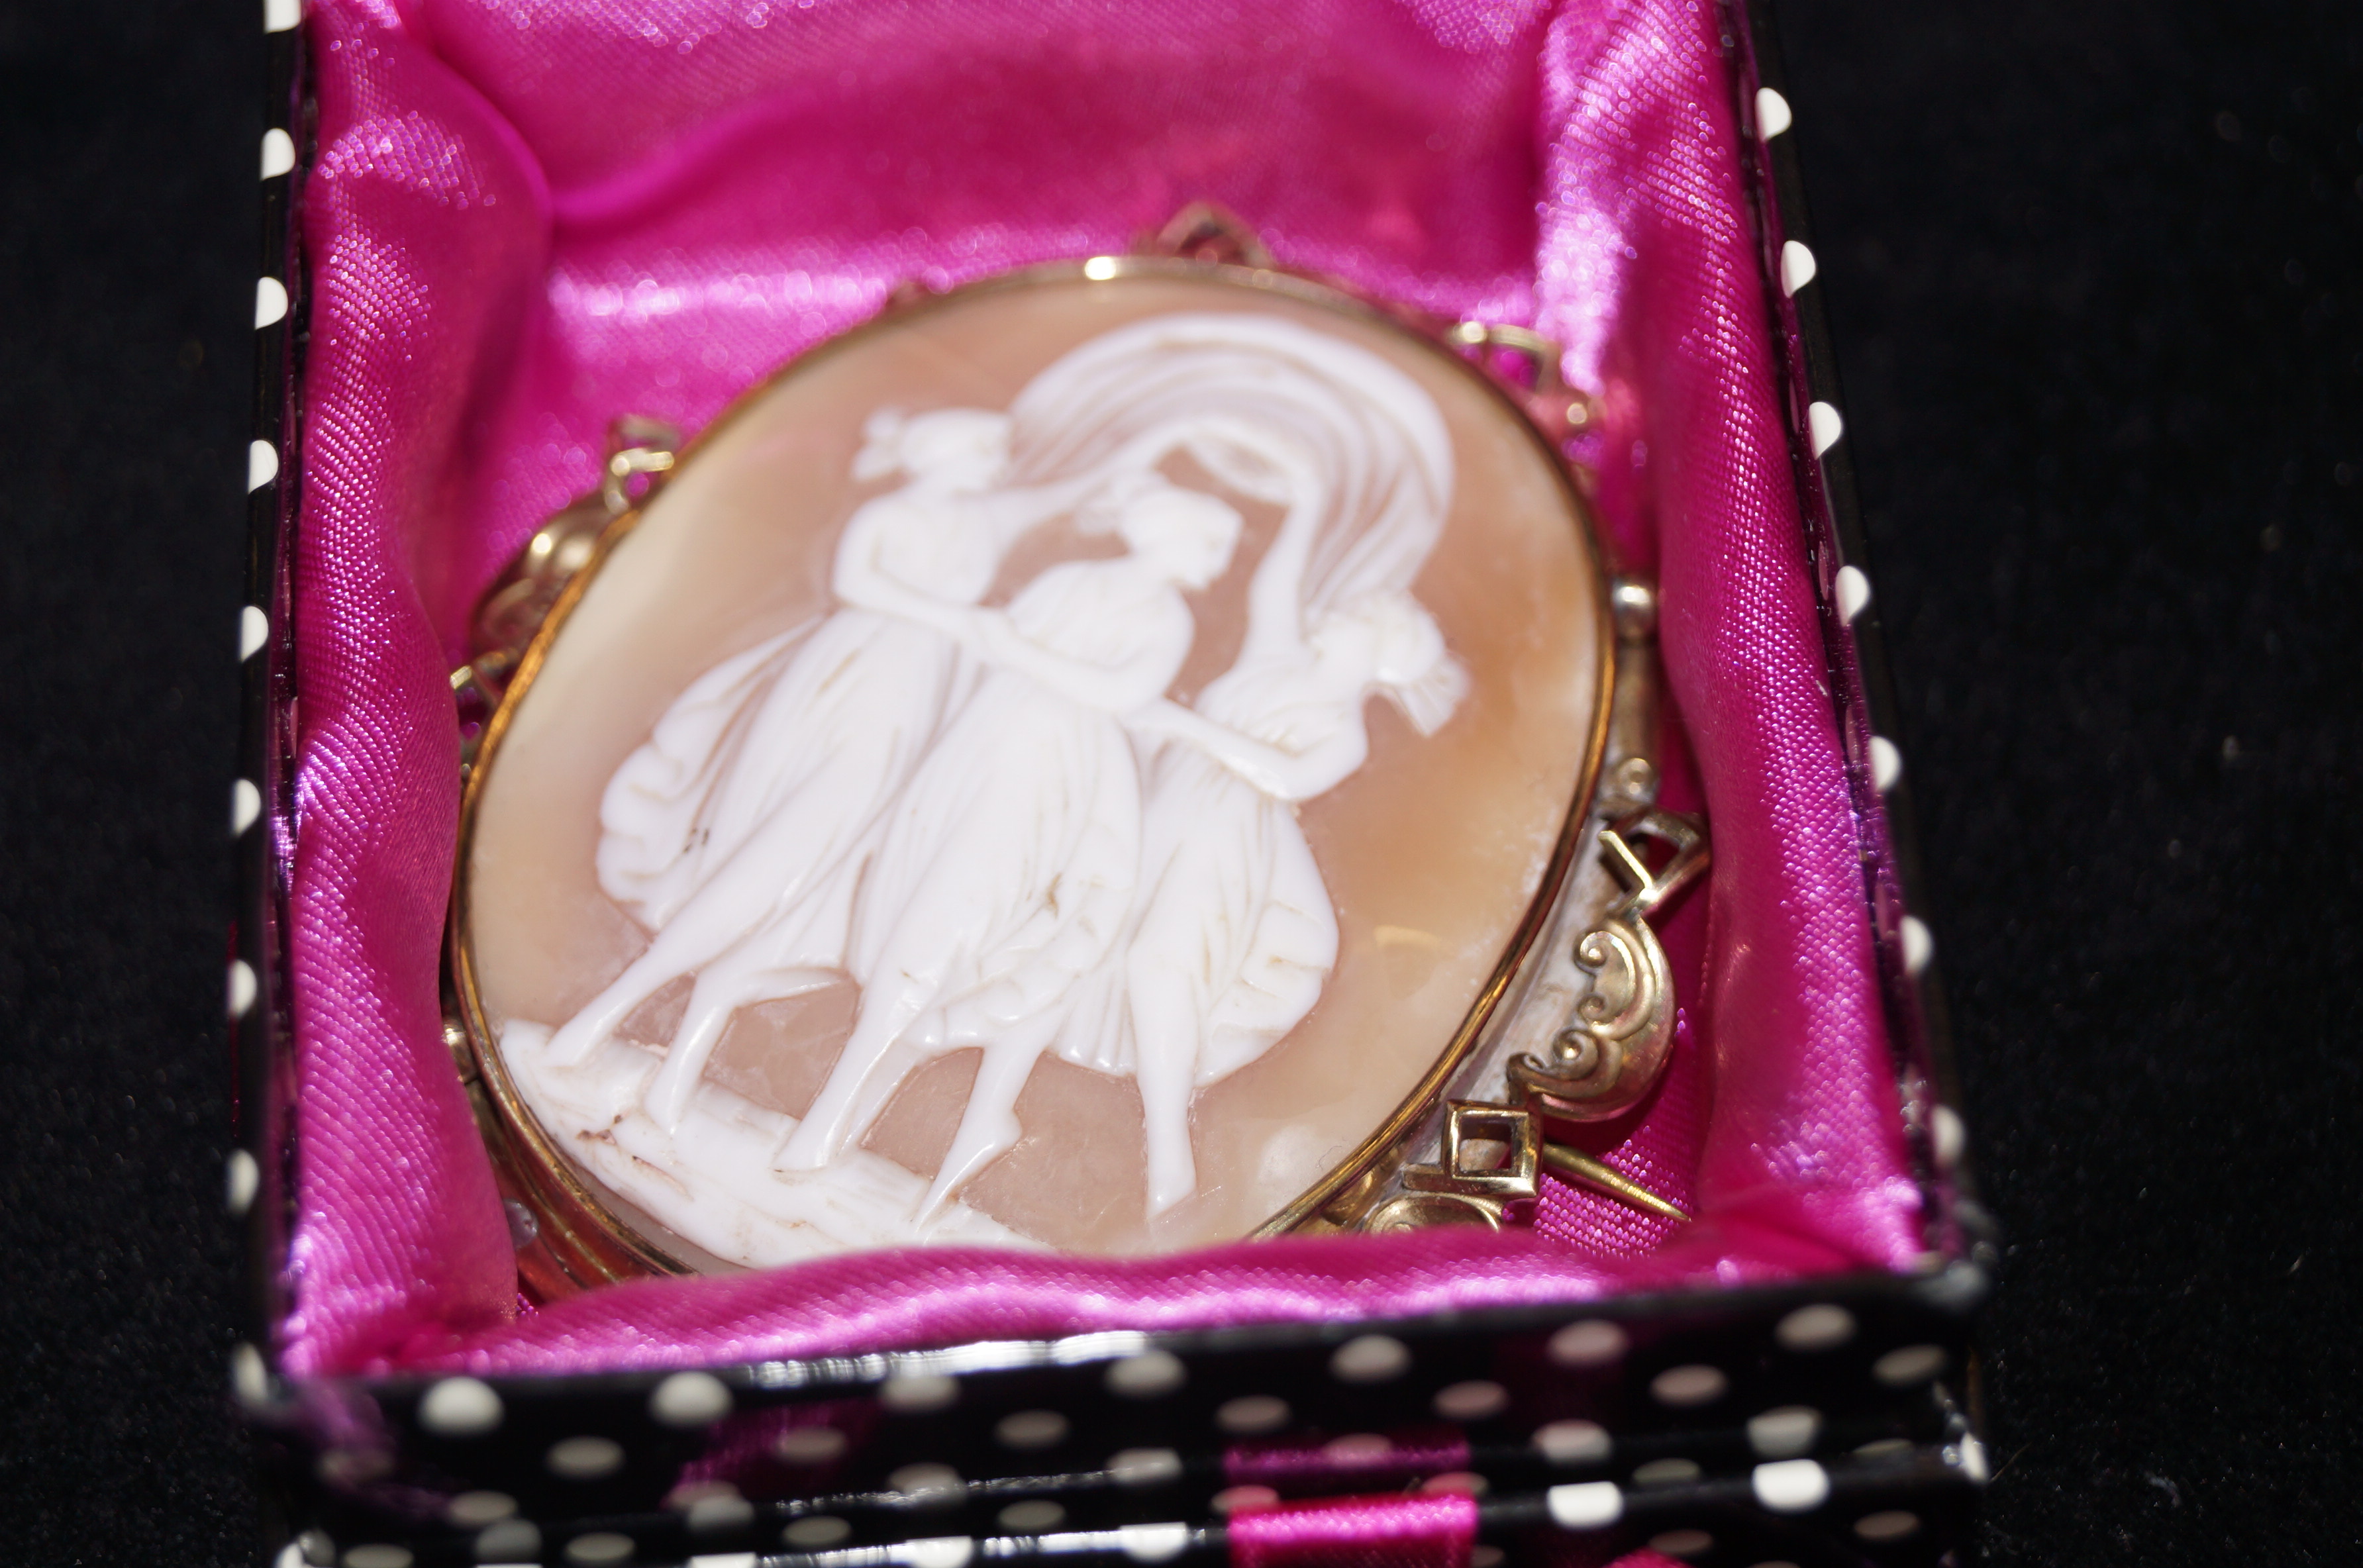 Piwch-beck cameo The 3 graces brooch